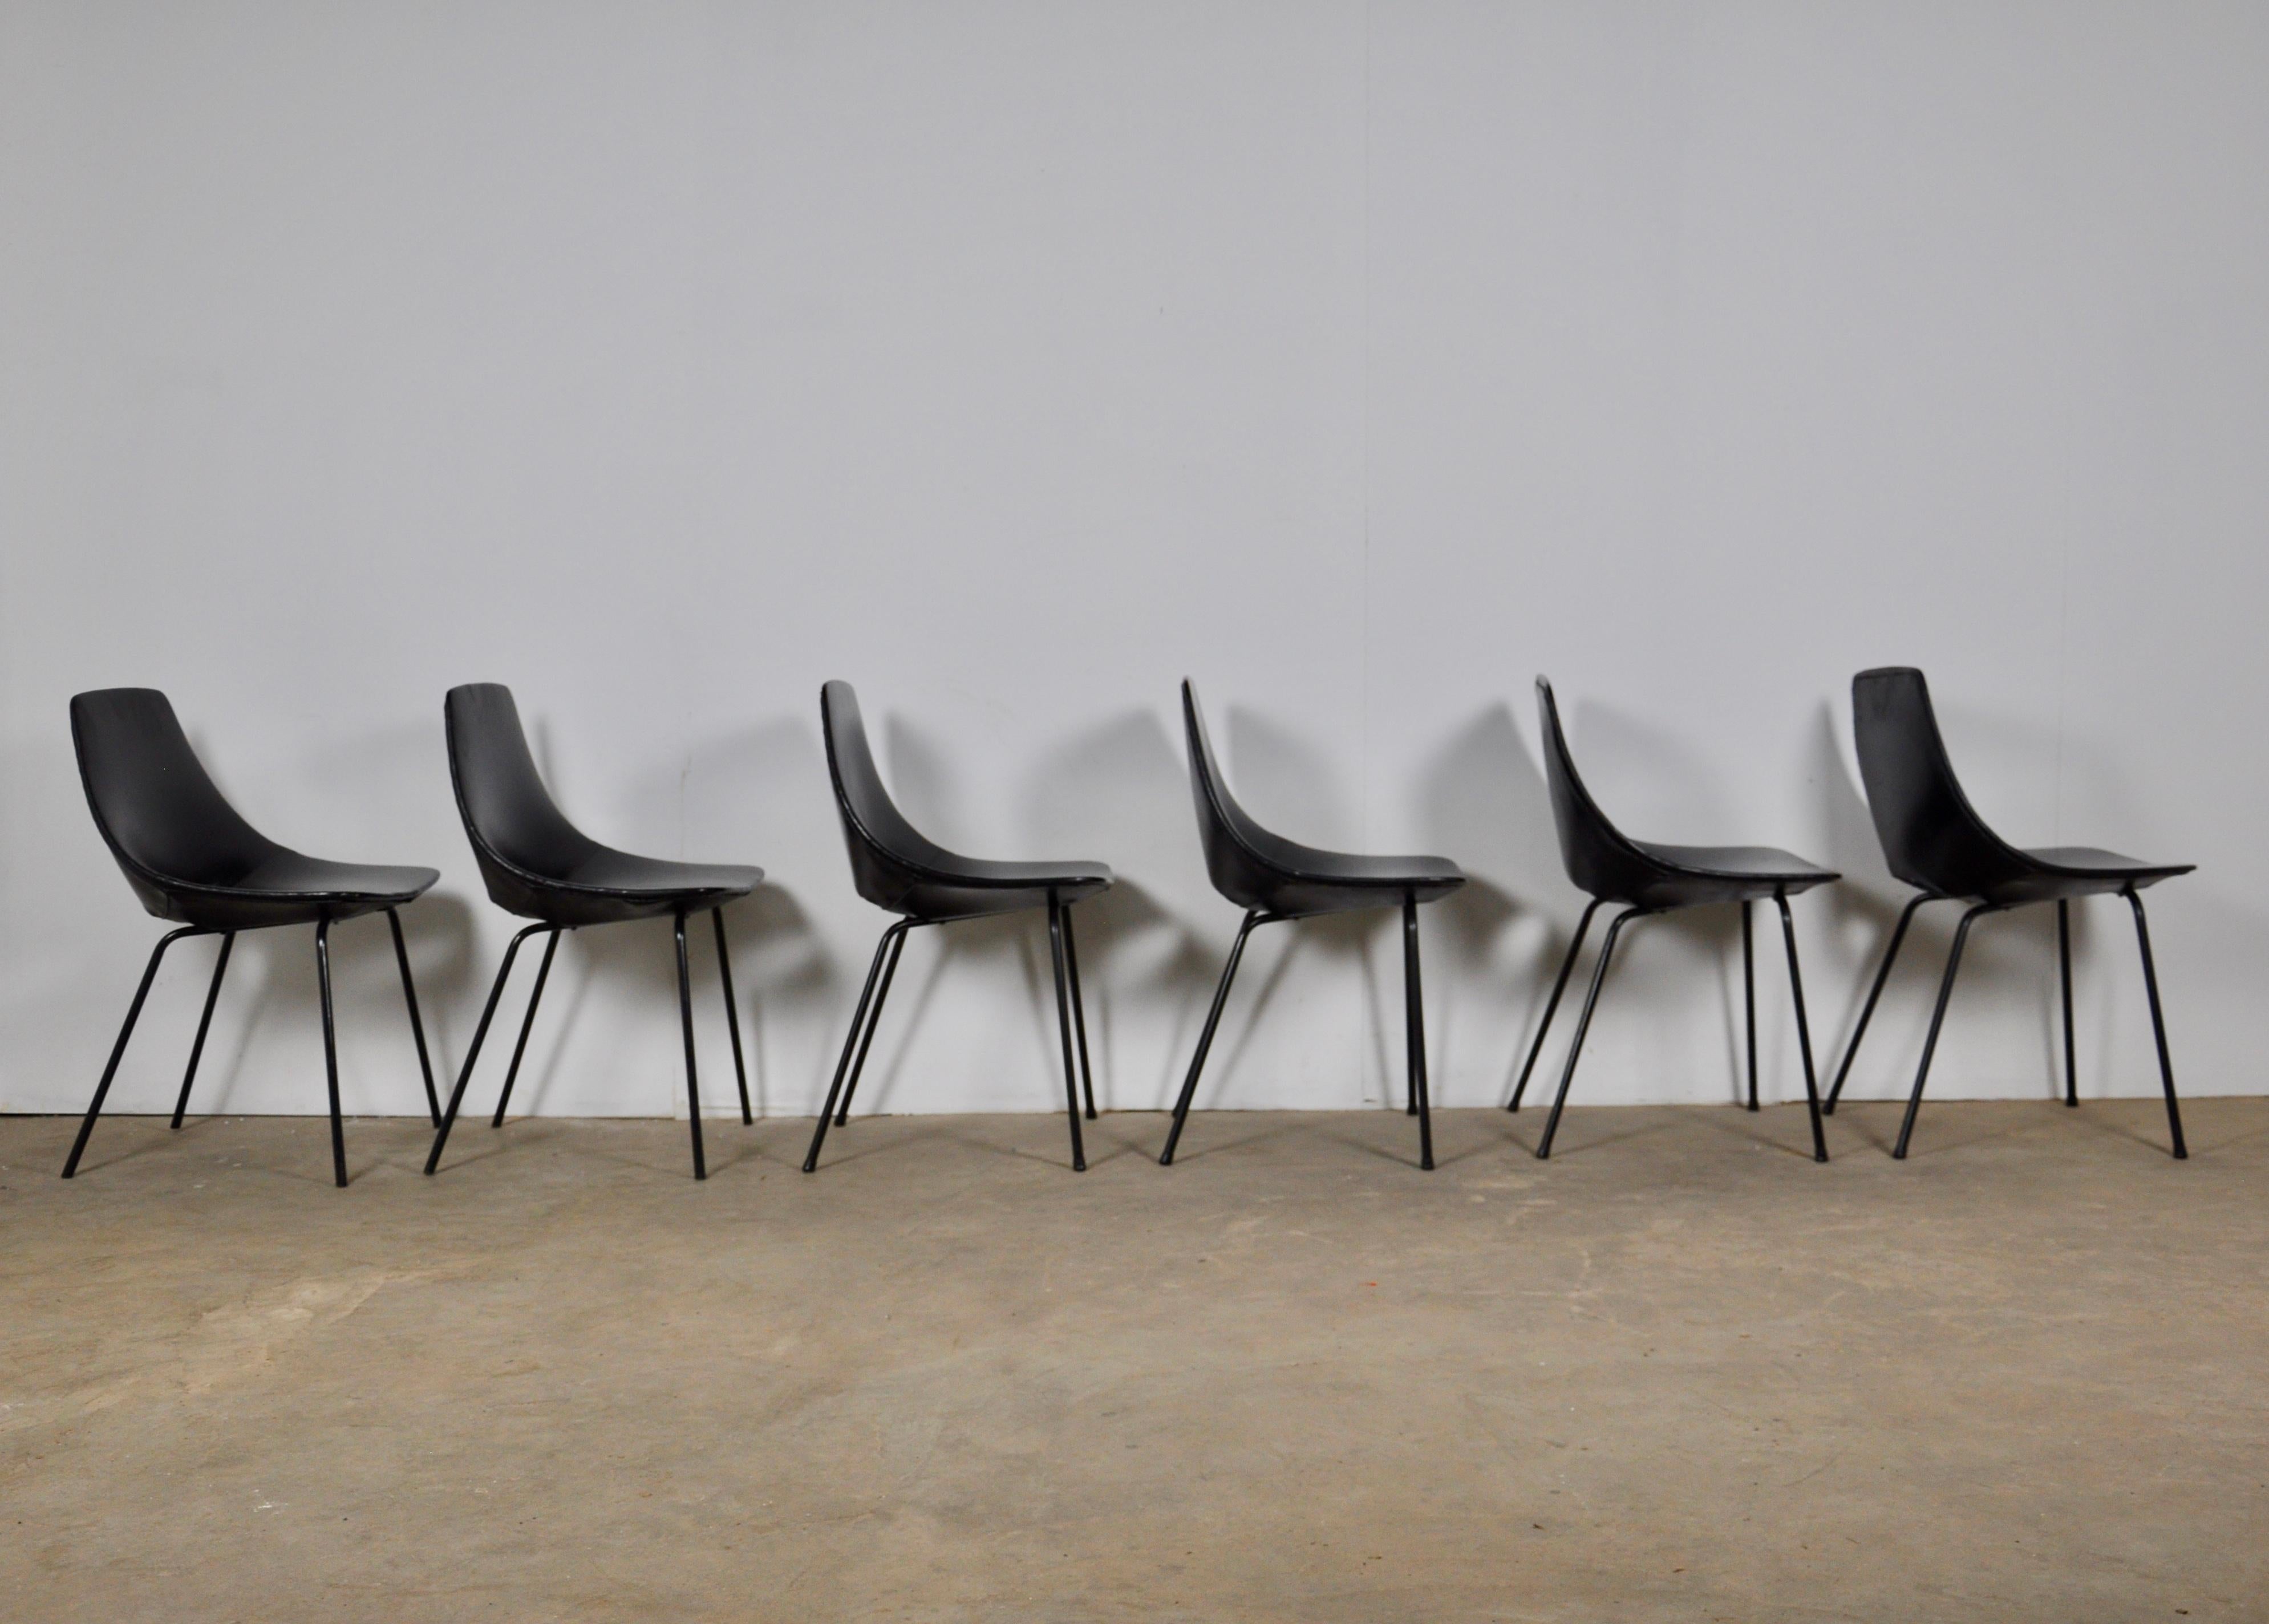 French Tonneau Chairs by Pierre Guariche for Steiner, 1950s Set of 6